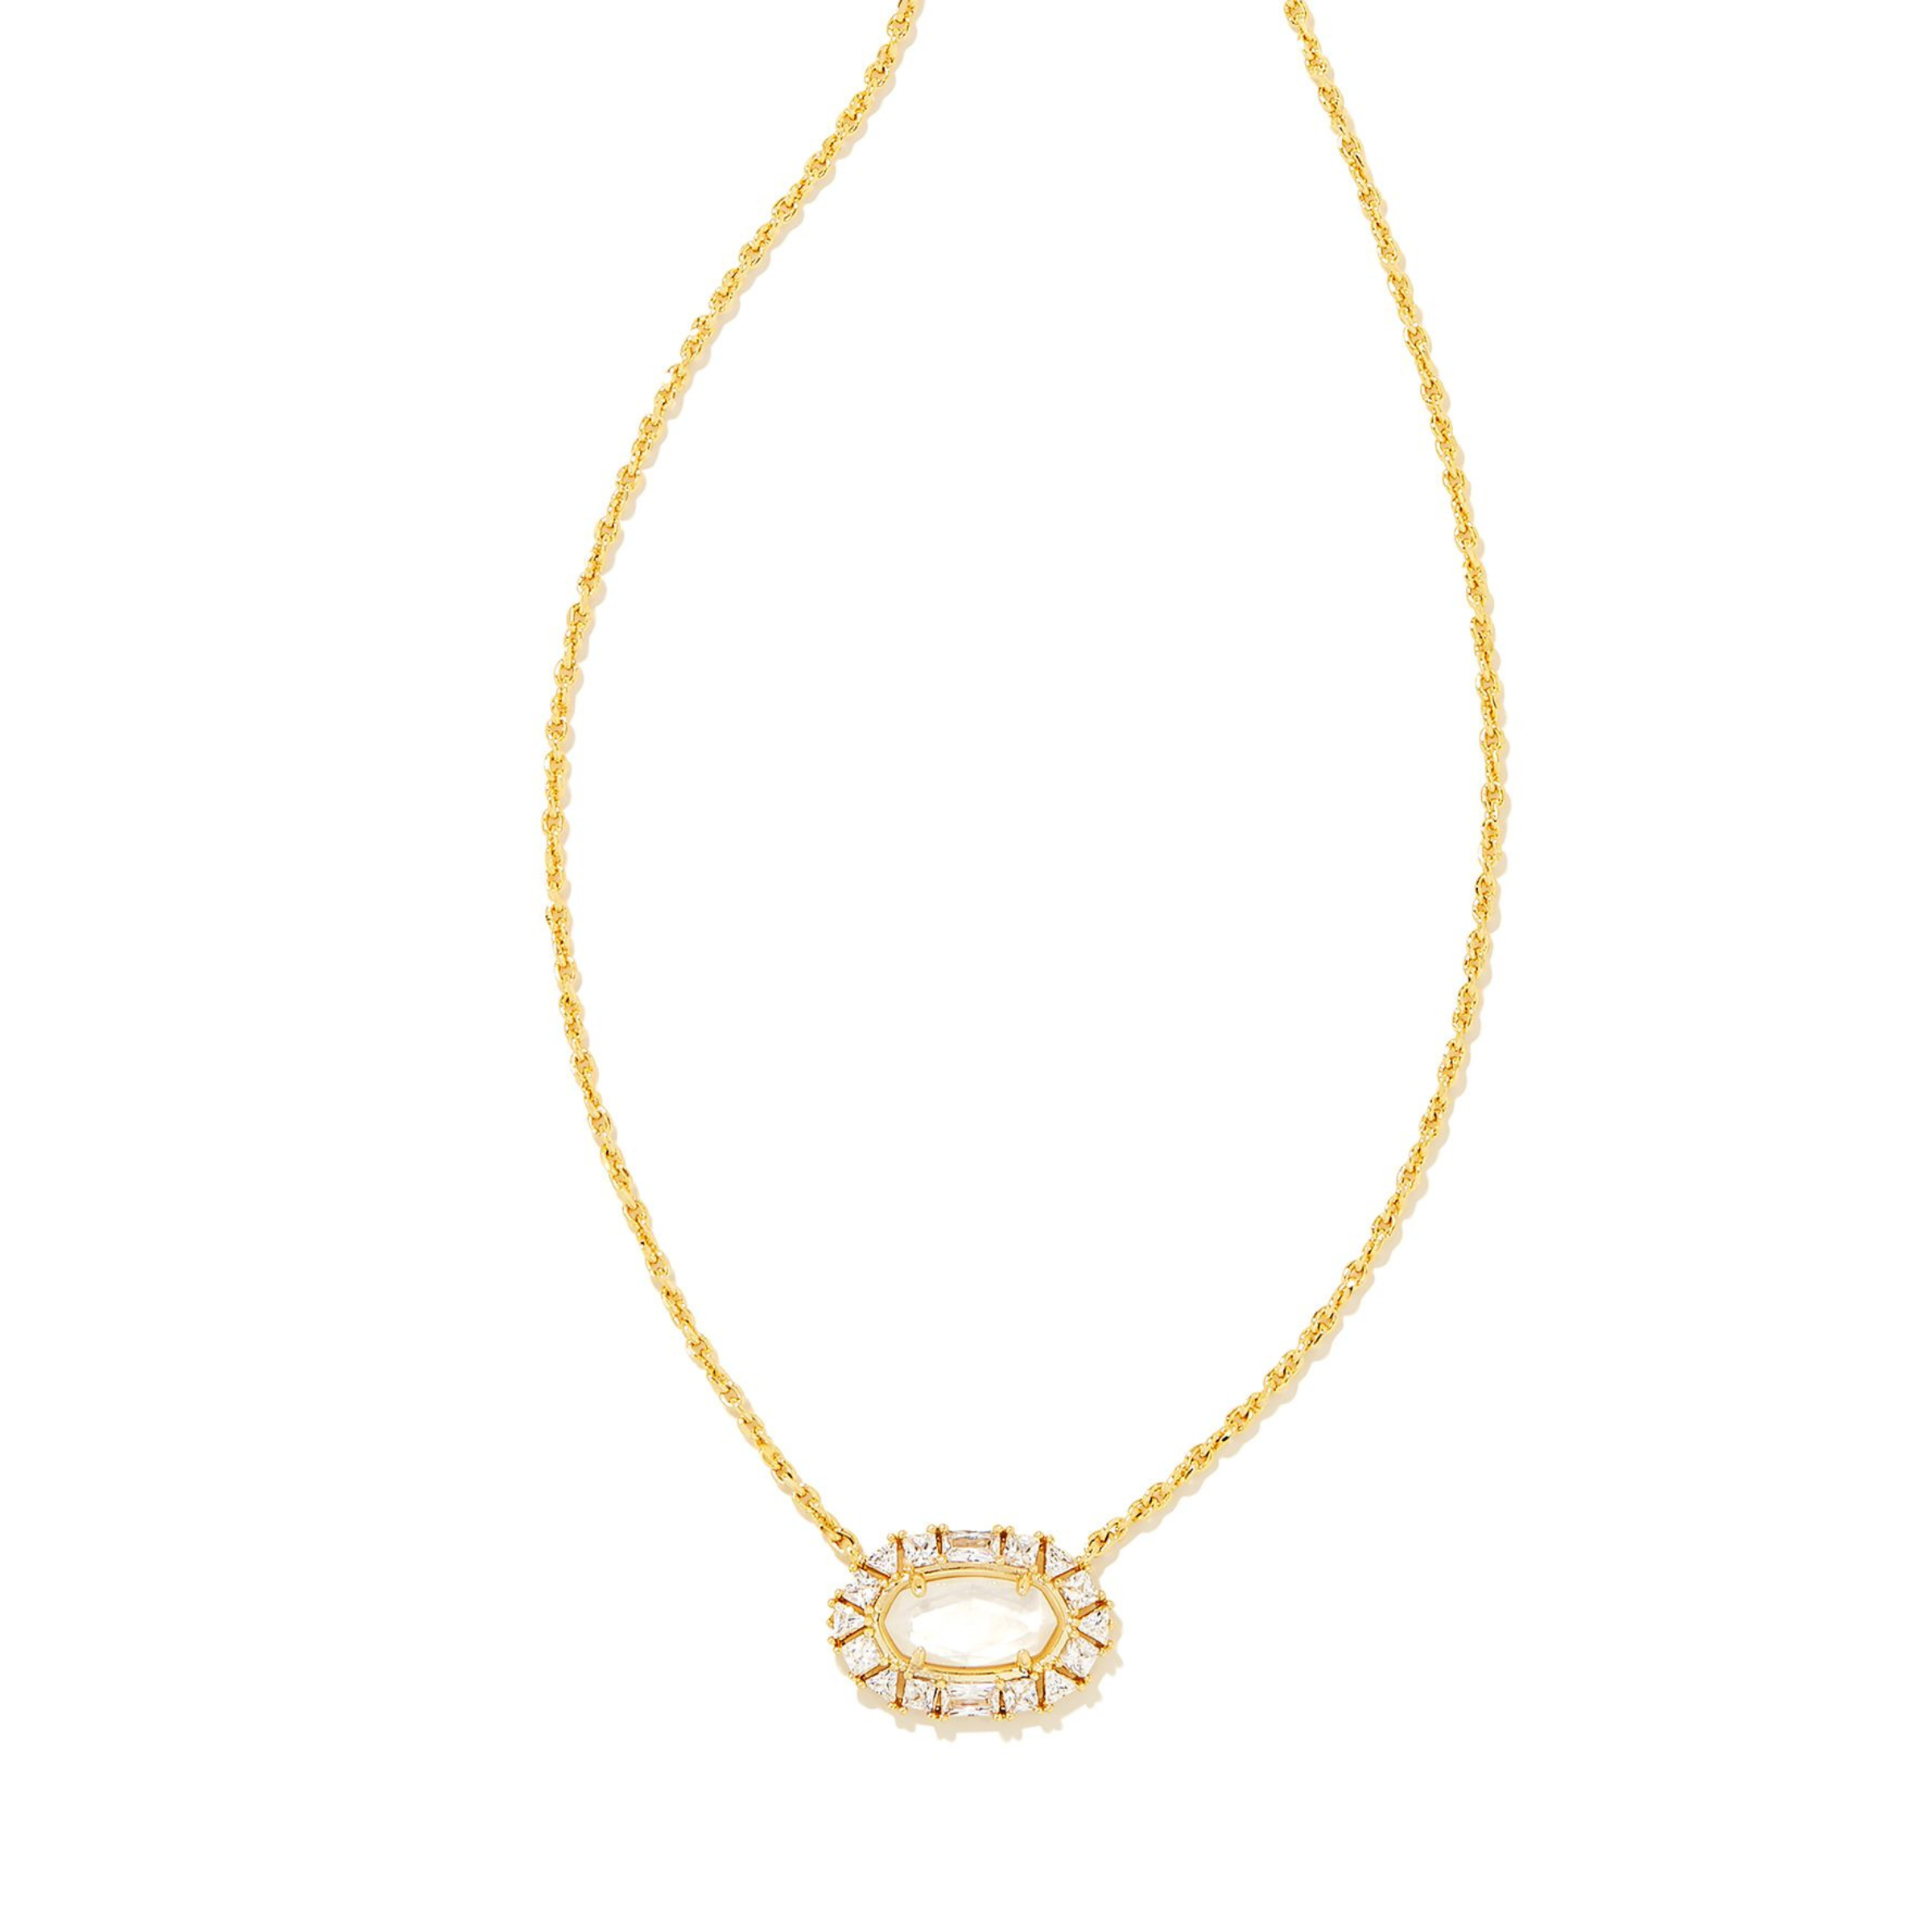 Gold chain necklace with a clear crystal and ivory mother of pearl oval pendant pictured on a white background. 